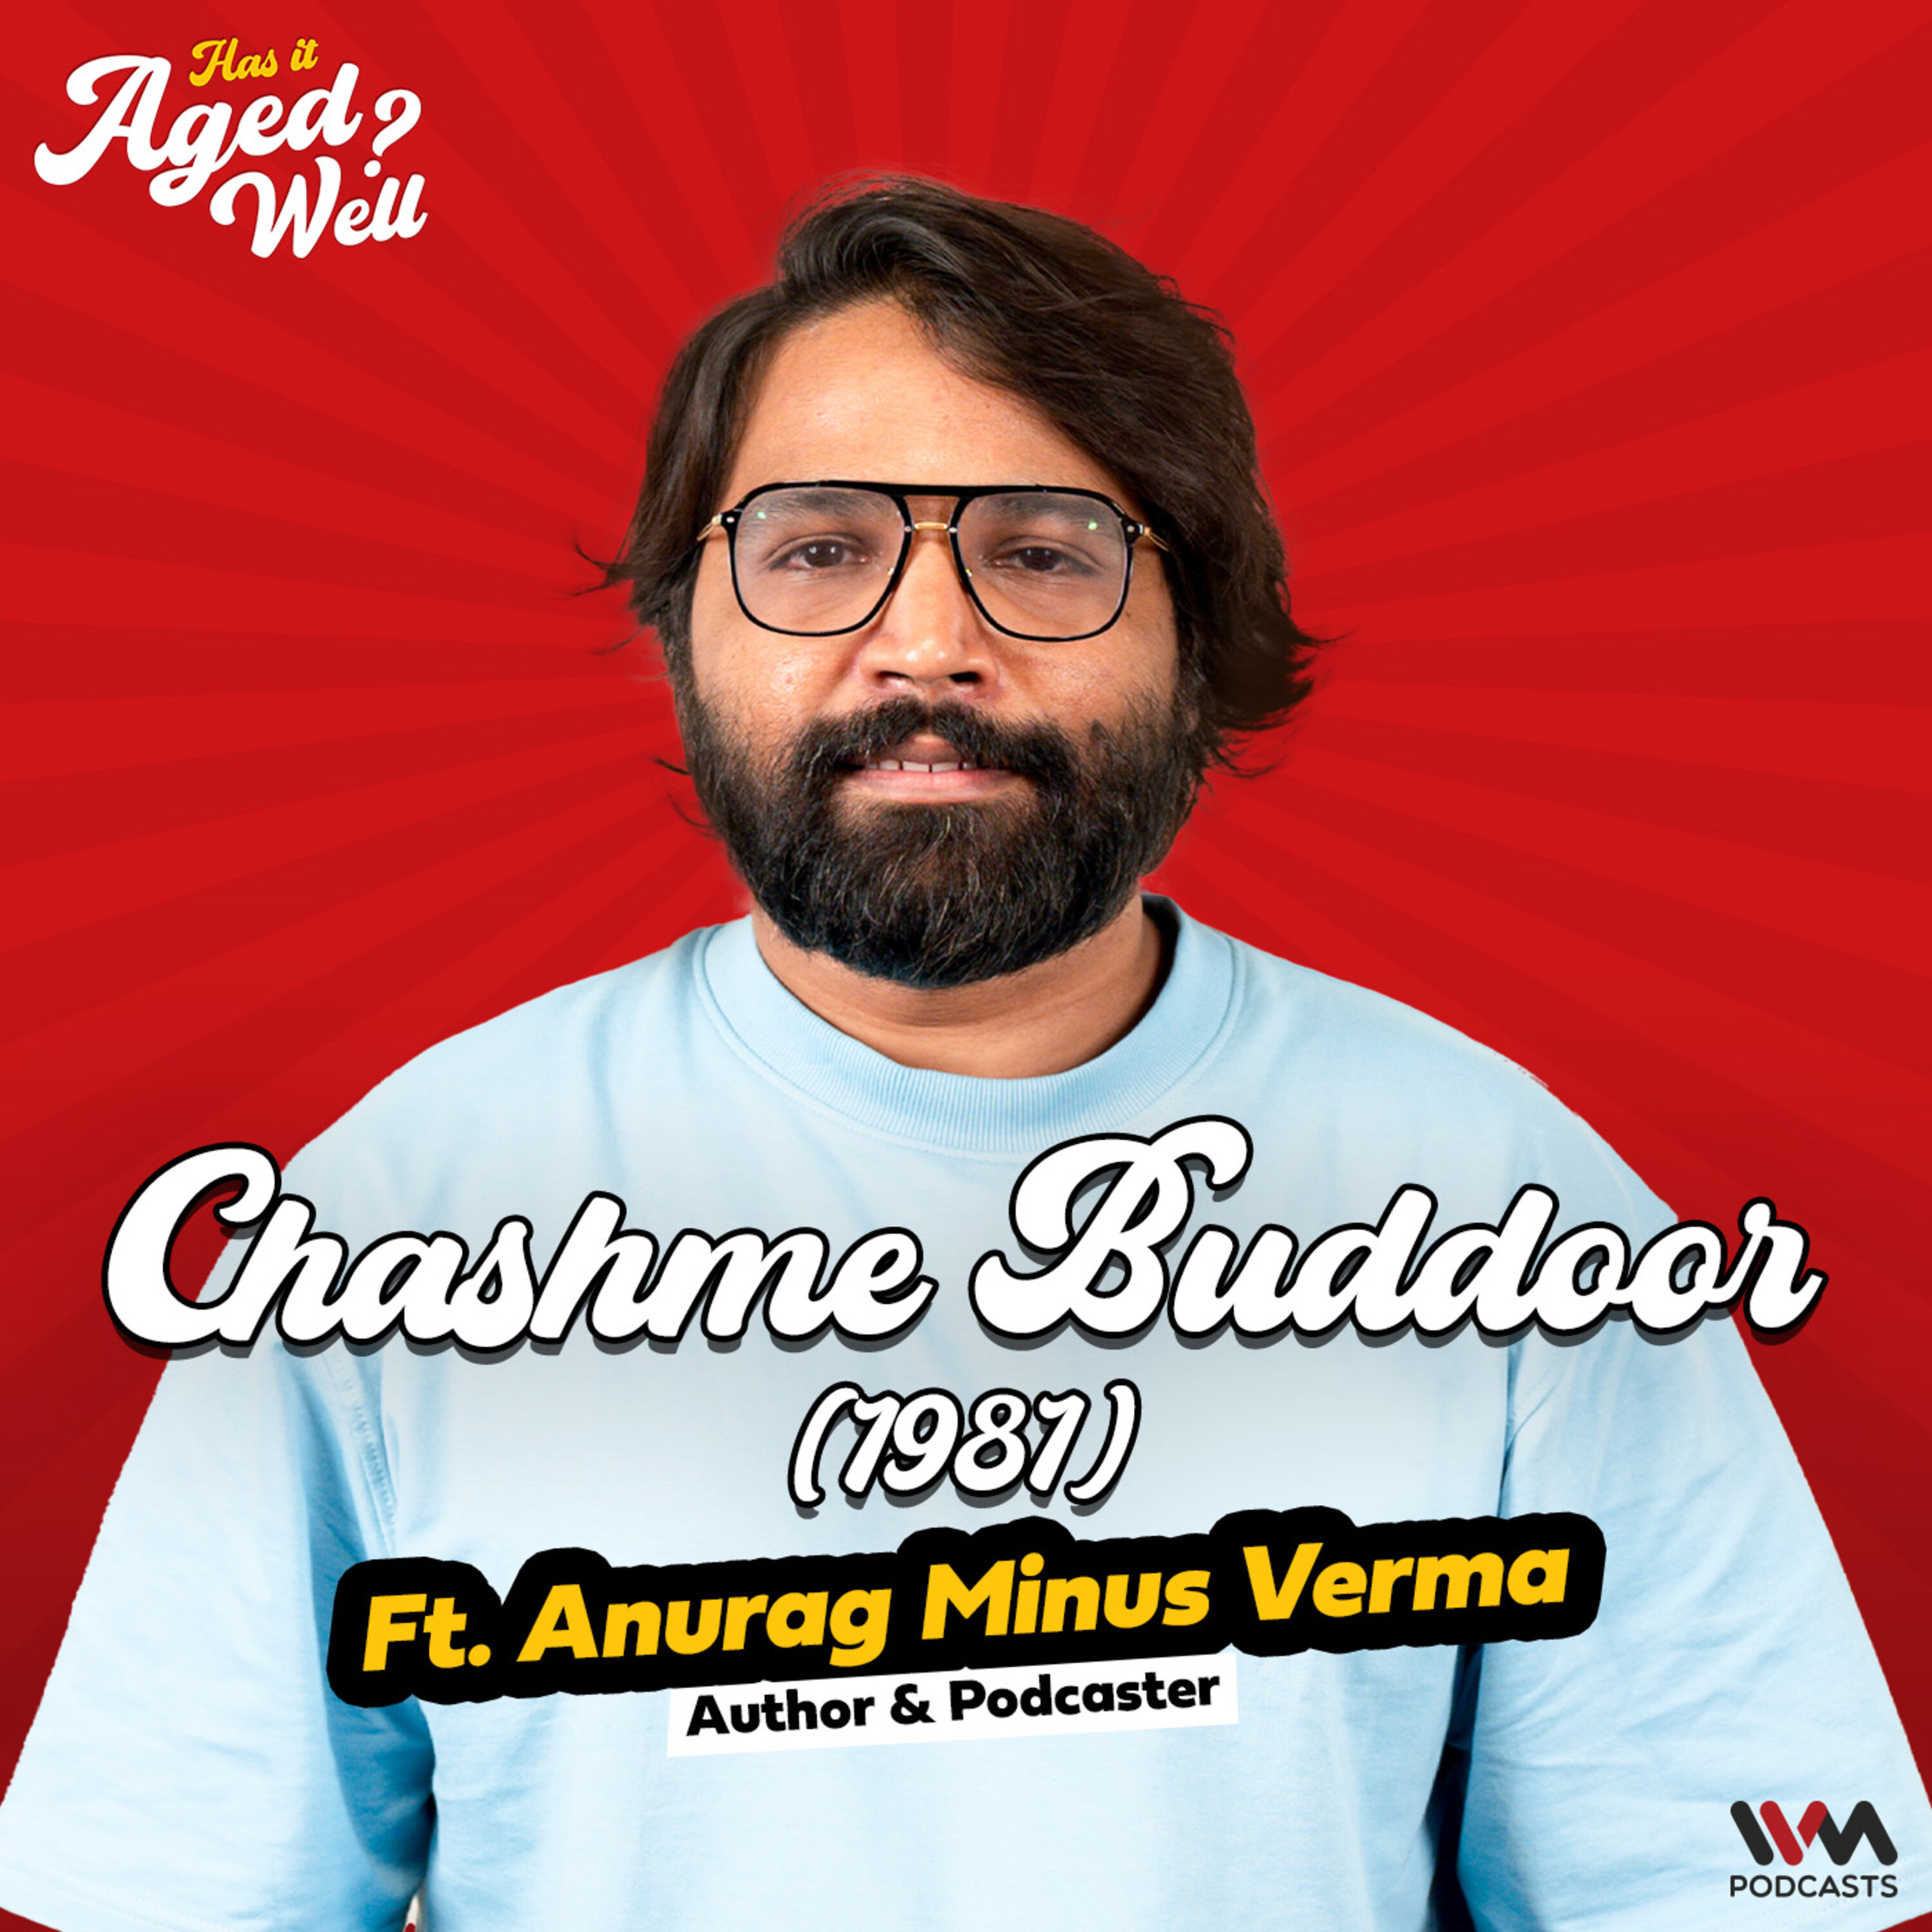 Chashme Buddoor (1981) ft. Anurag Minus Verma | Has It Aged Well?